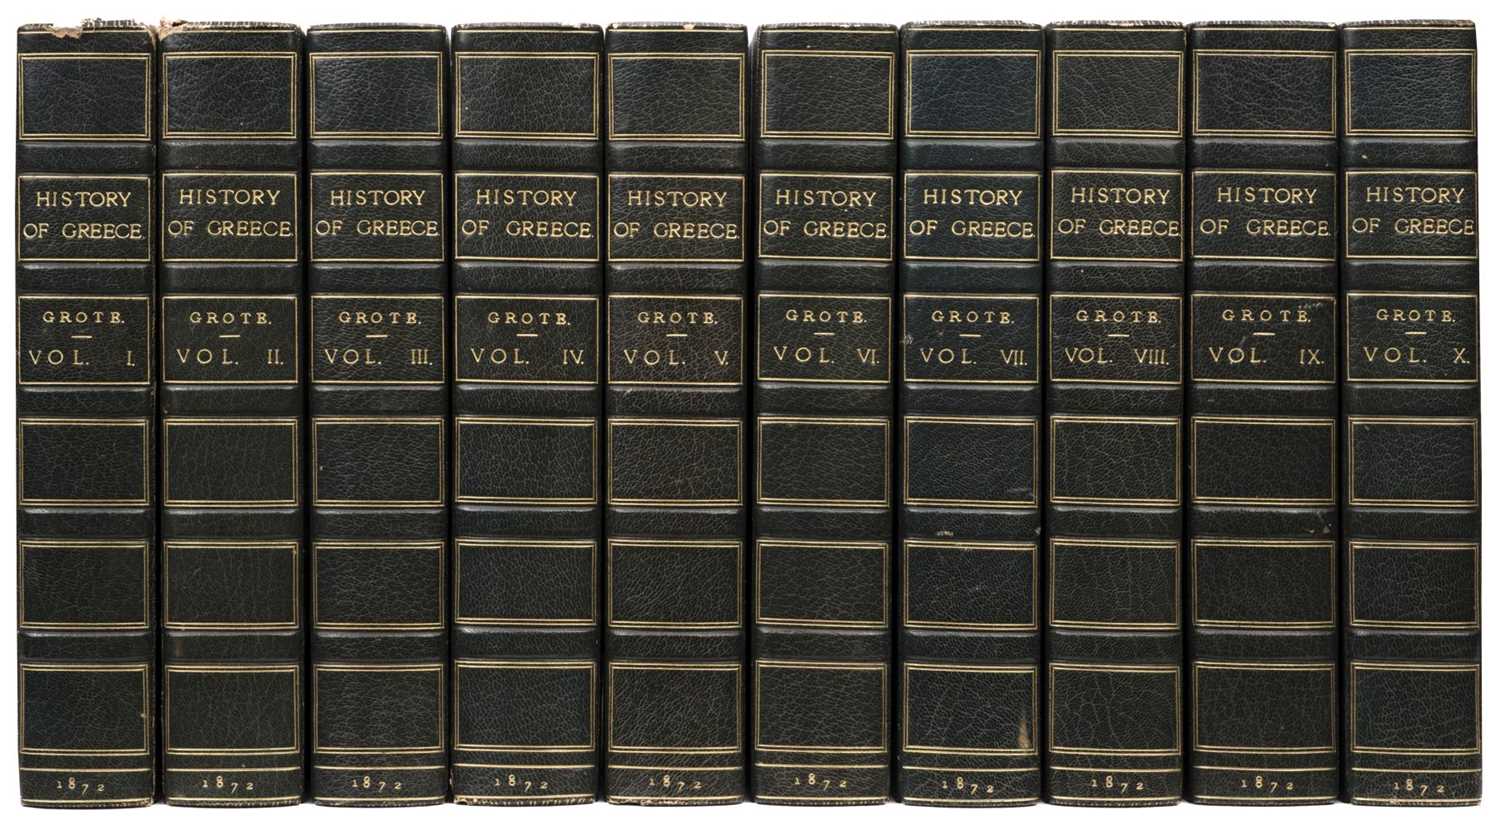 Lot 326 - Grote (George). A History of Greece, 10 volumes, 4th edition, 1872